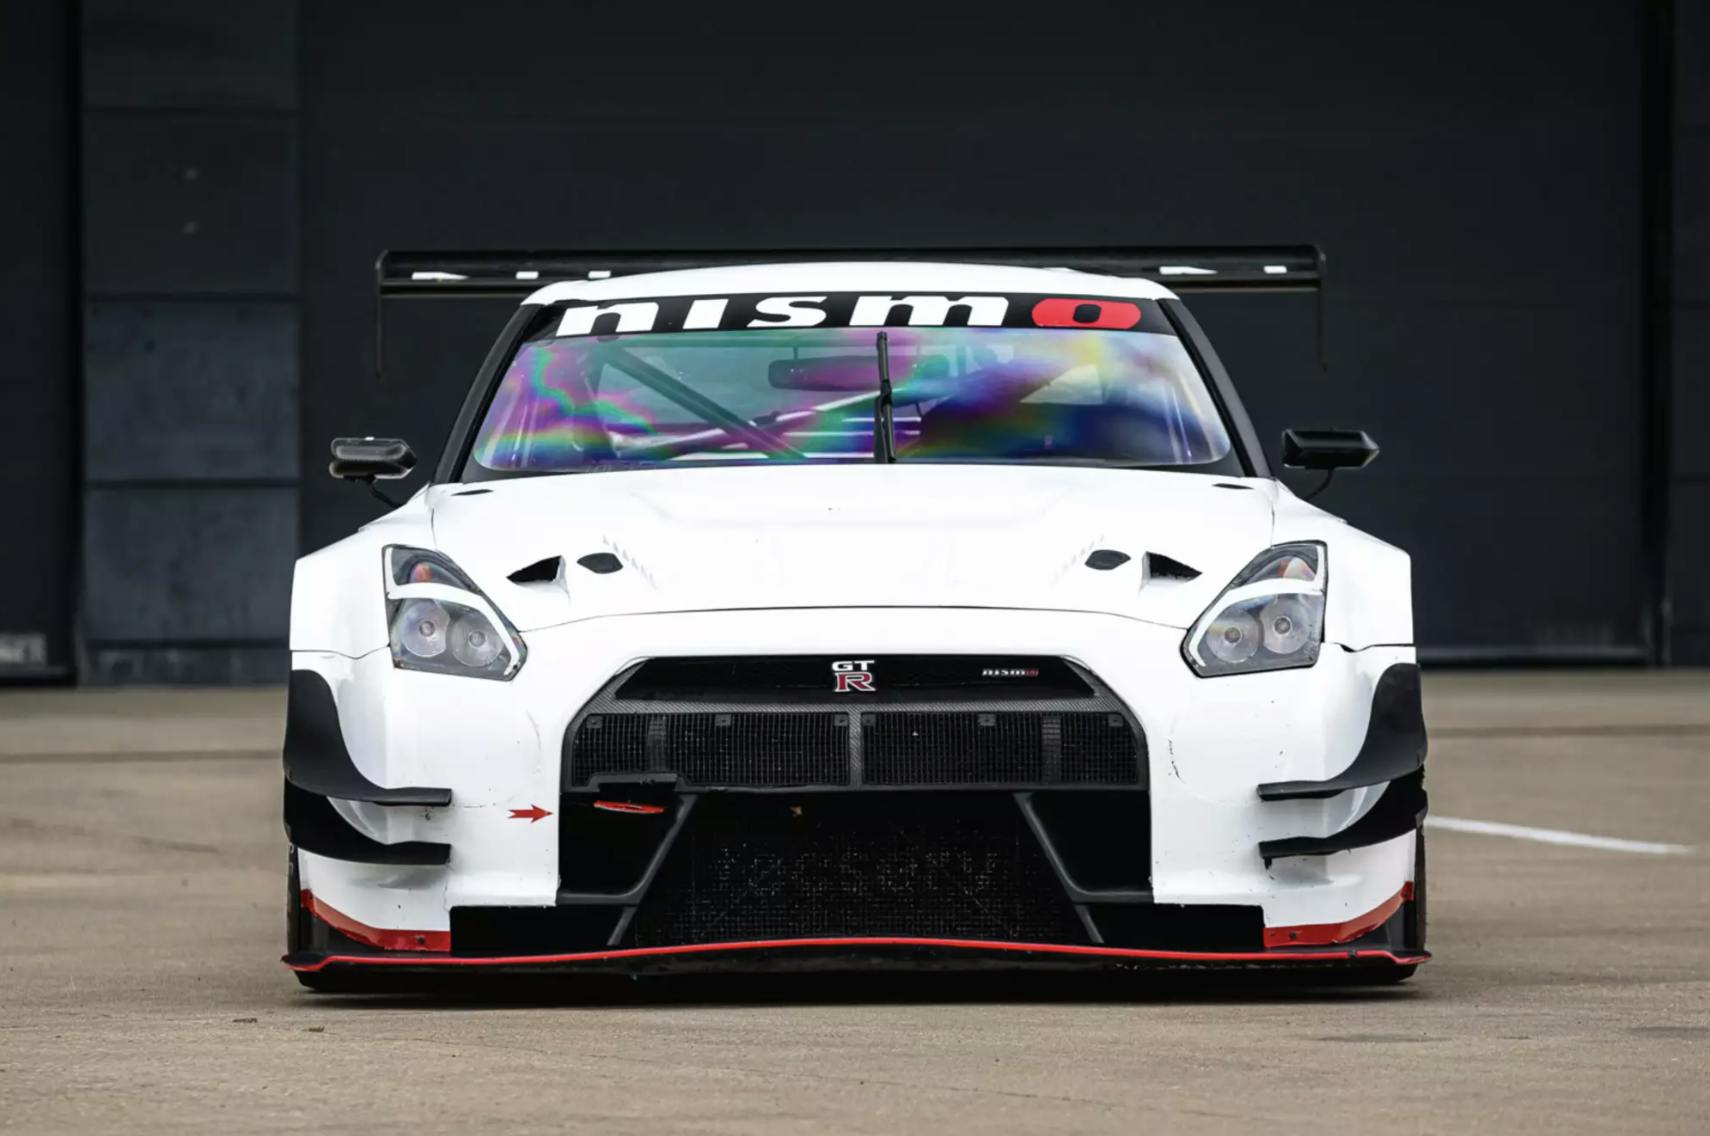 Gran Turismo movie's star GT-R up for auction - Hagerty Media